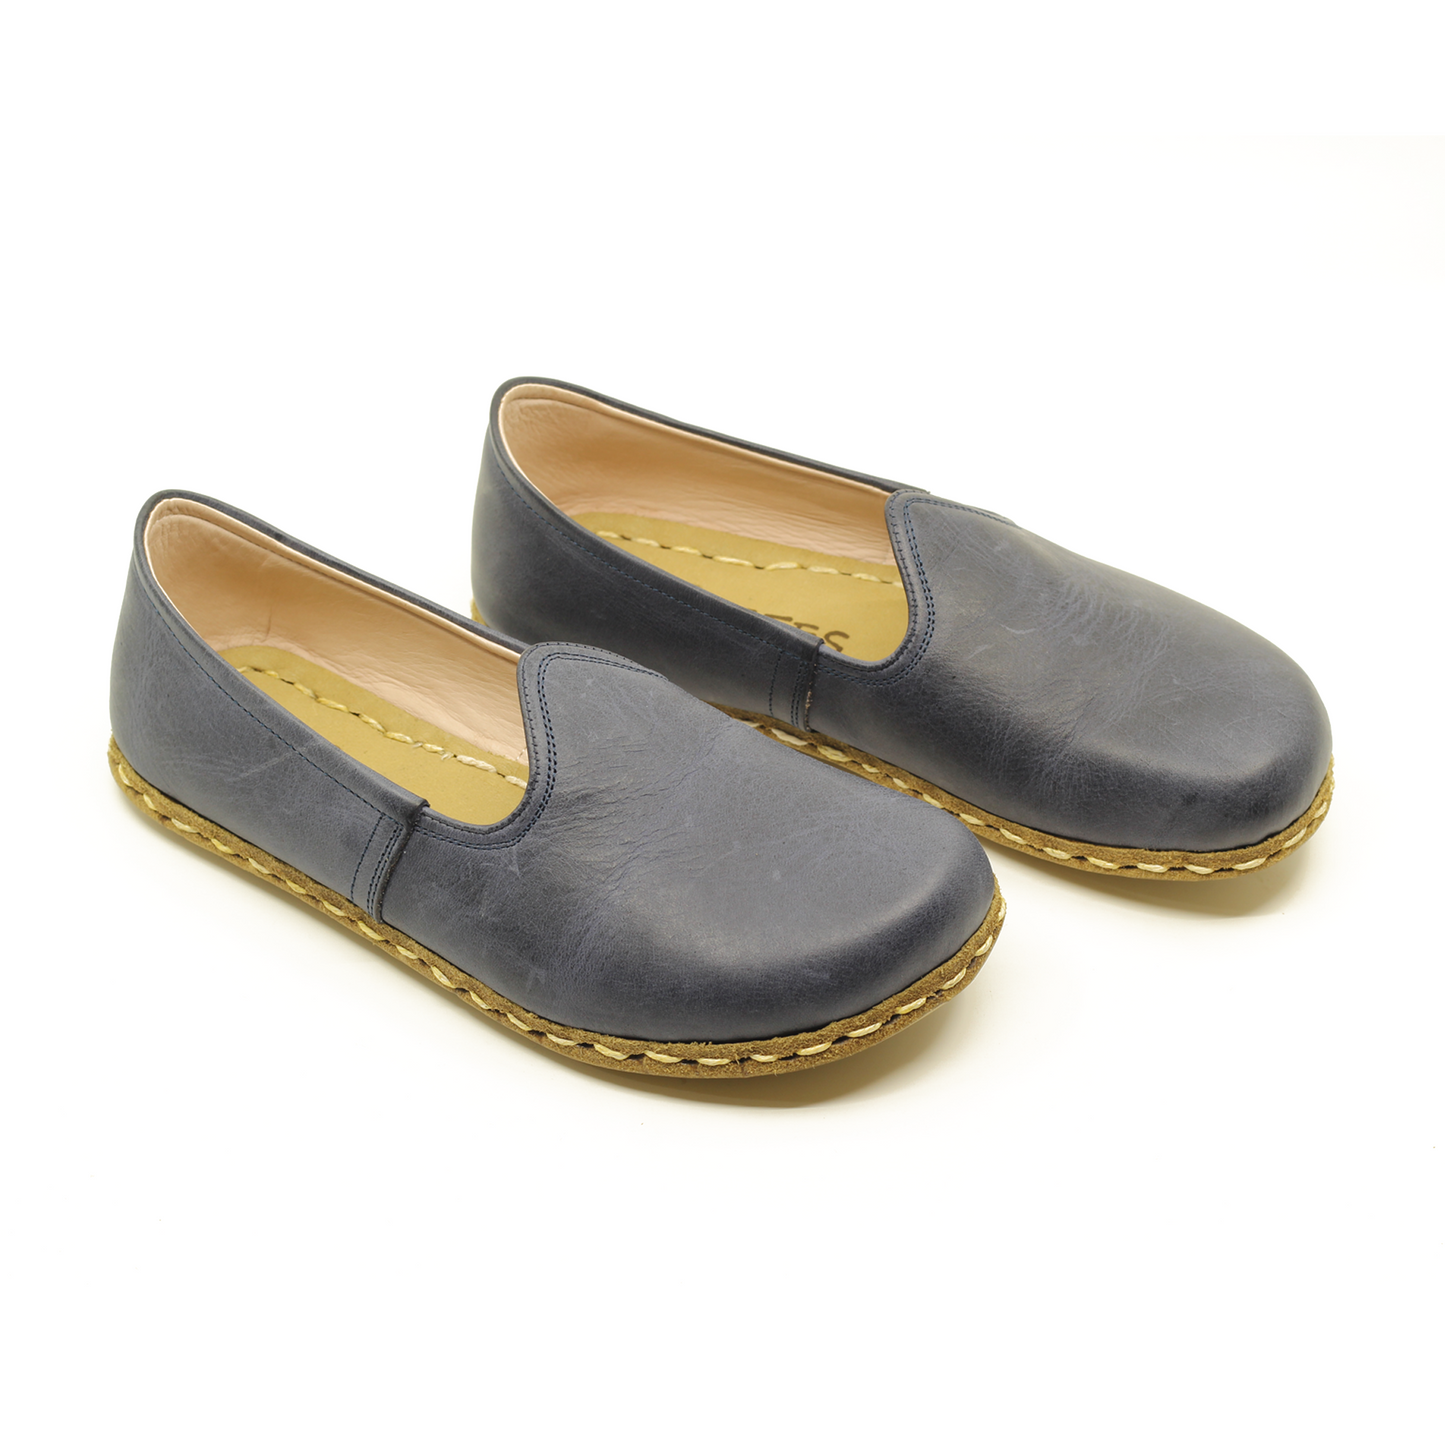 Classic Crazy Navy Blue Barefoot Shoes - Zero Drop Handmade Leather